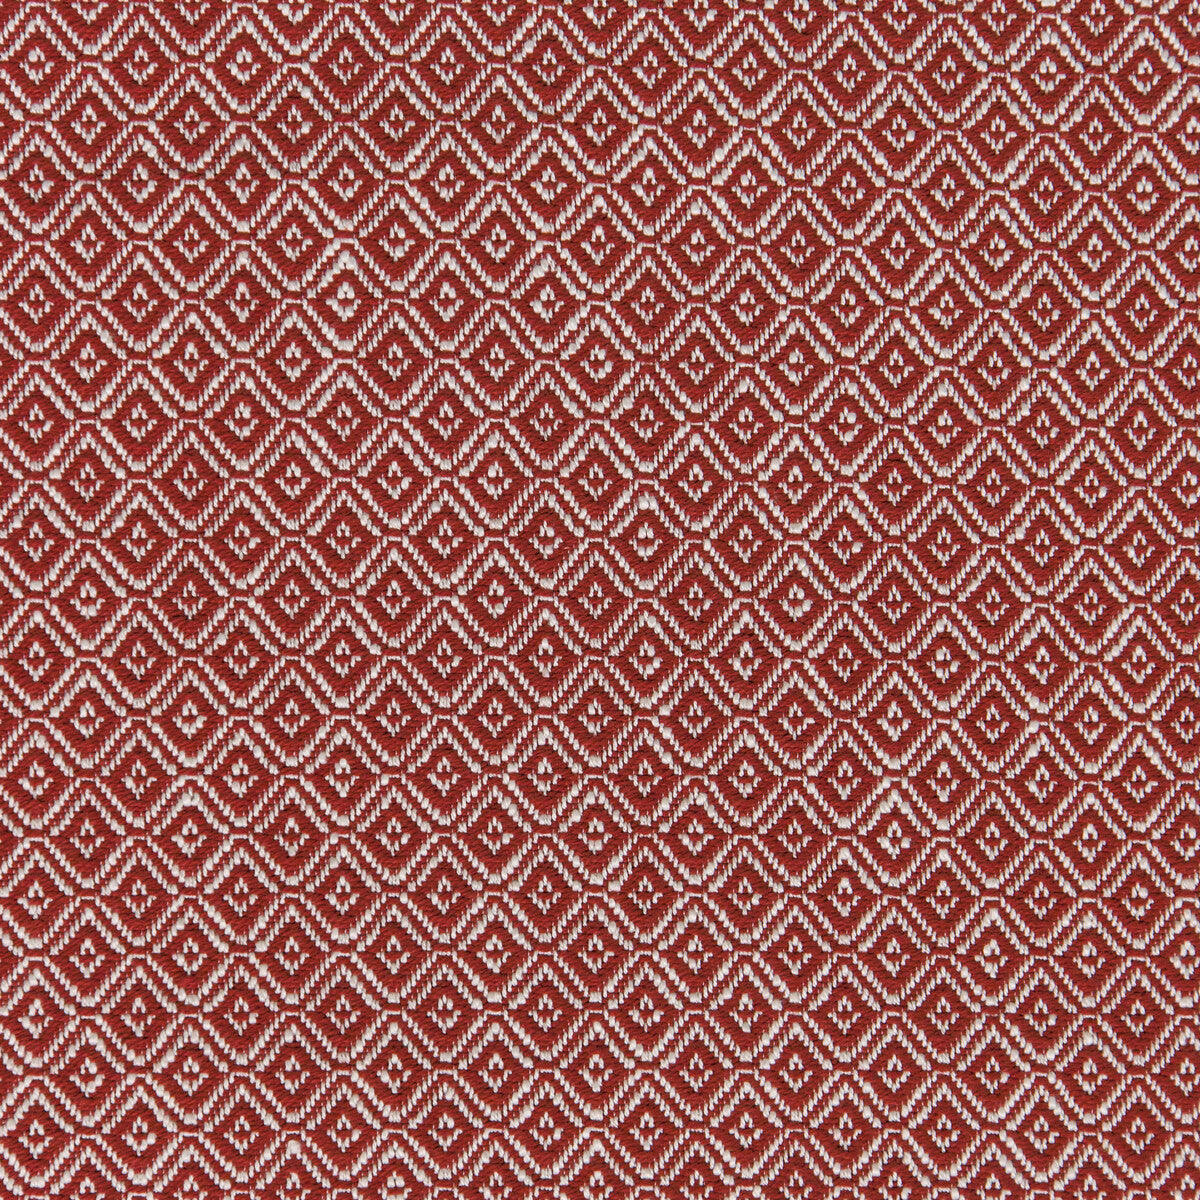 Seaford Weave fabric in brick color - pattern 2020106.919.0 - by Lee Jofa in the Linford Weaves collection